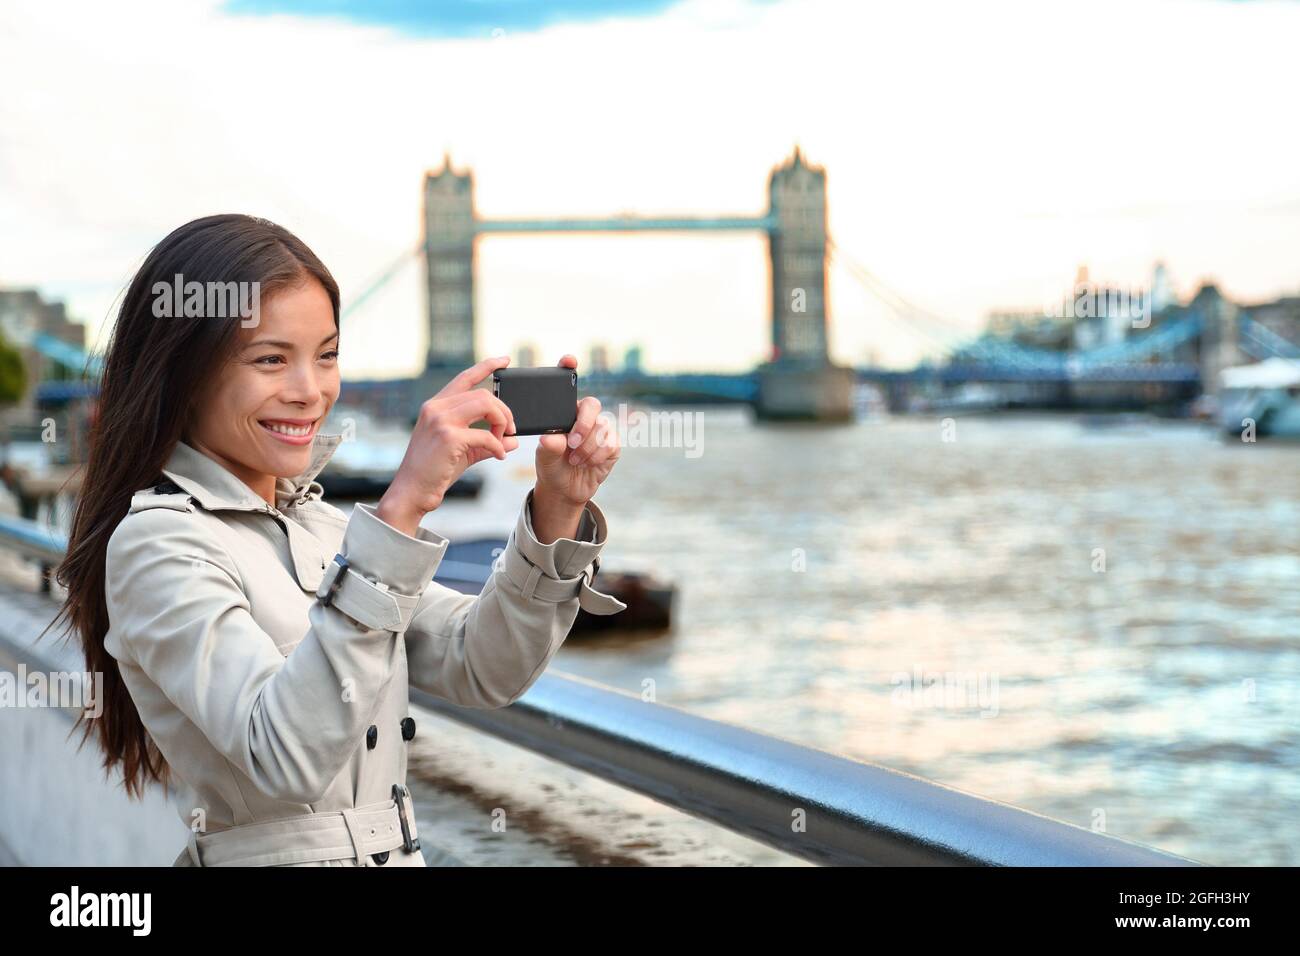 London woman tourist taking photo of Tower Bridge. London woman taking photos with mobile smart phone camera. Girl enjoying view over the River Thames Stock Photo